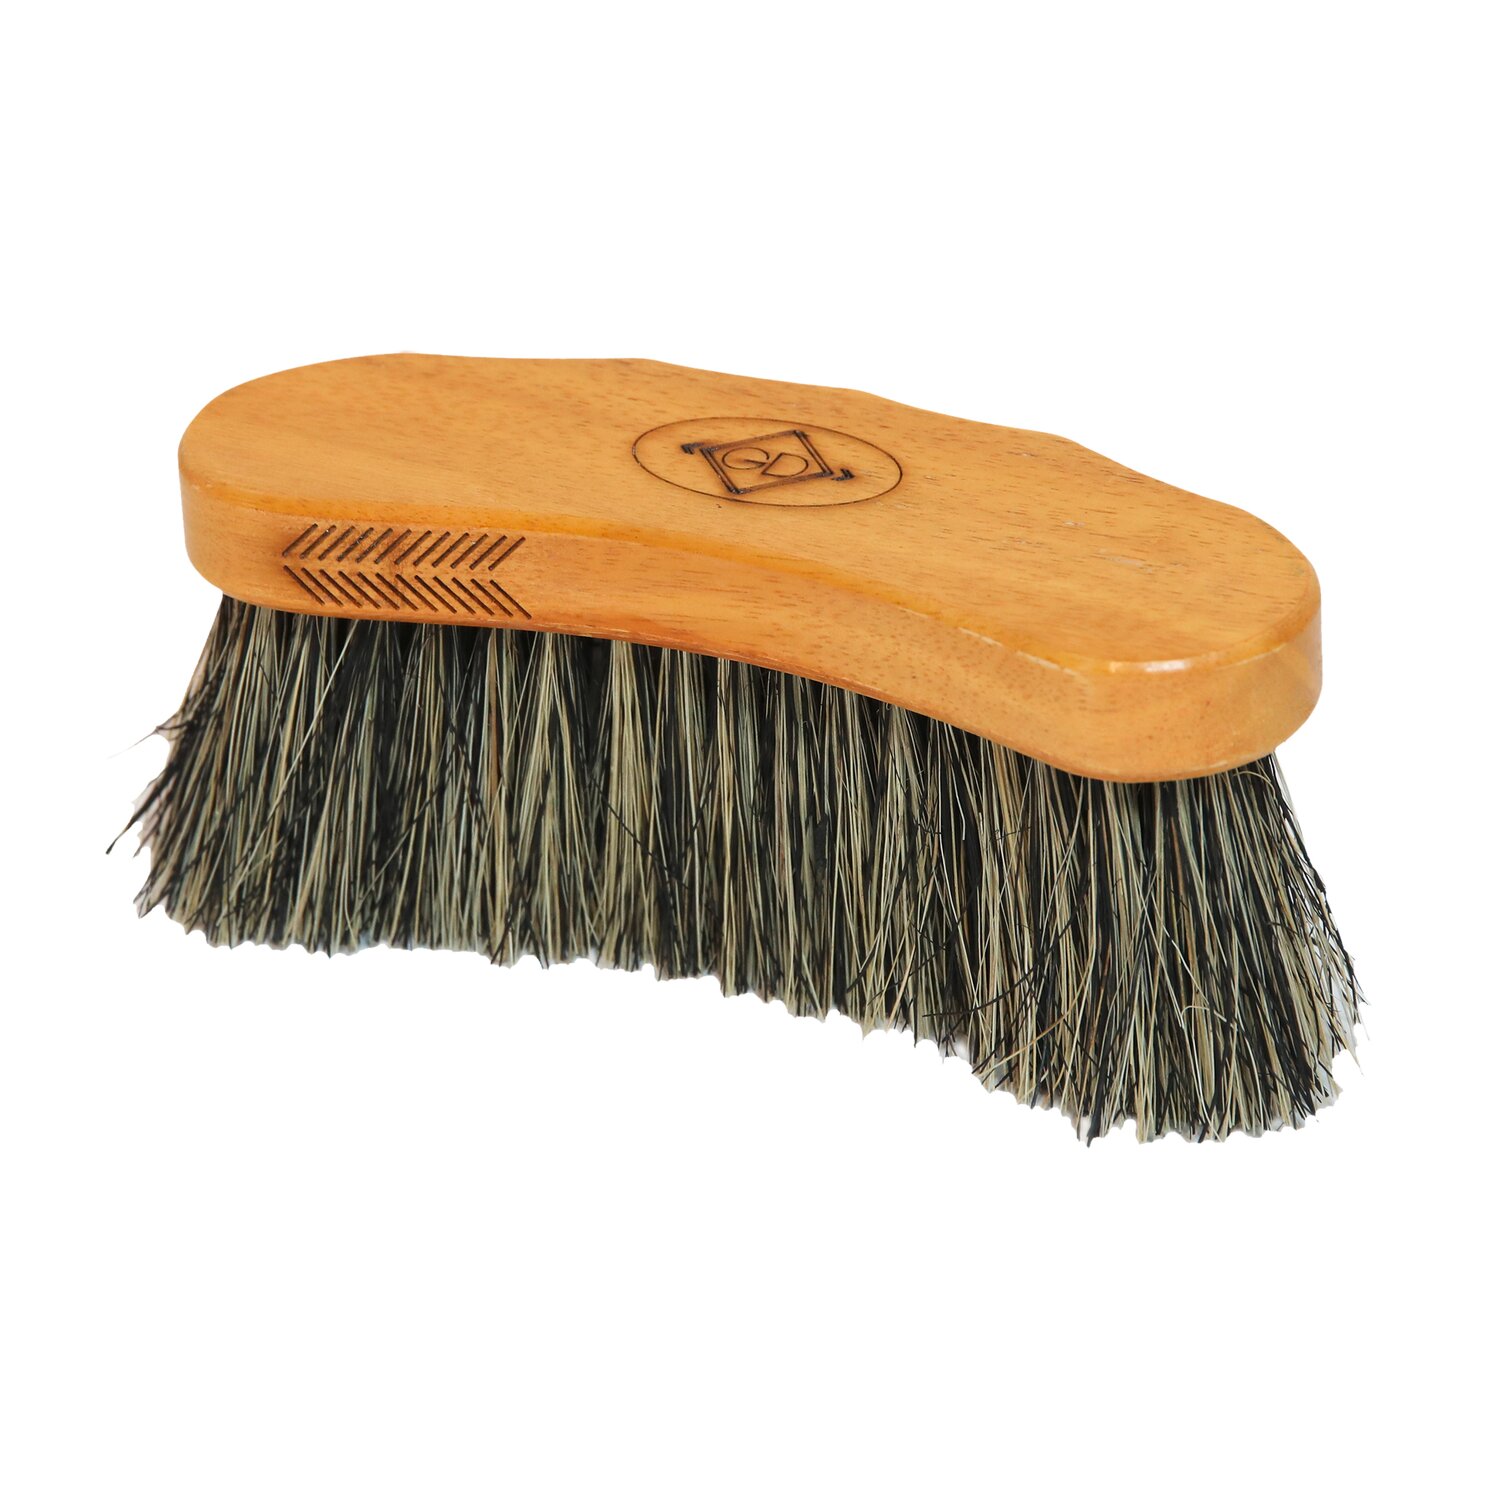 GROOMING DELUXE Middle Hard Brush 